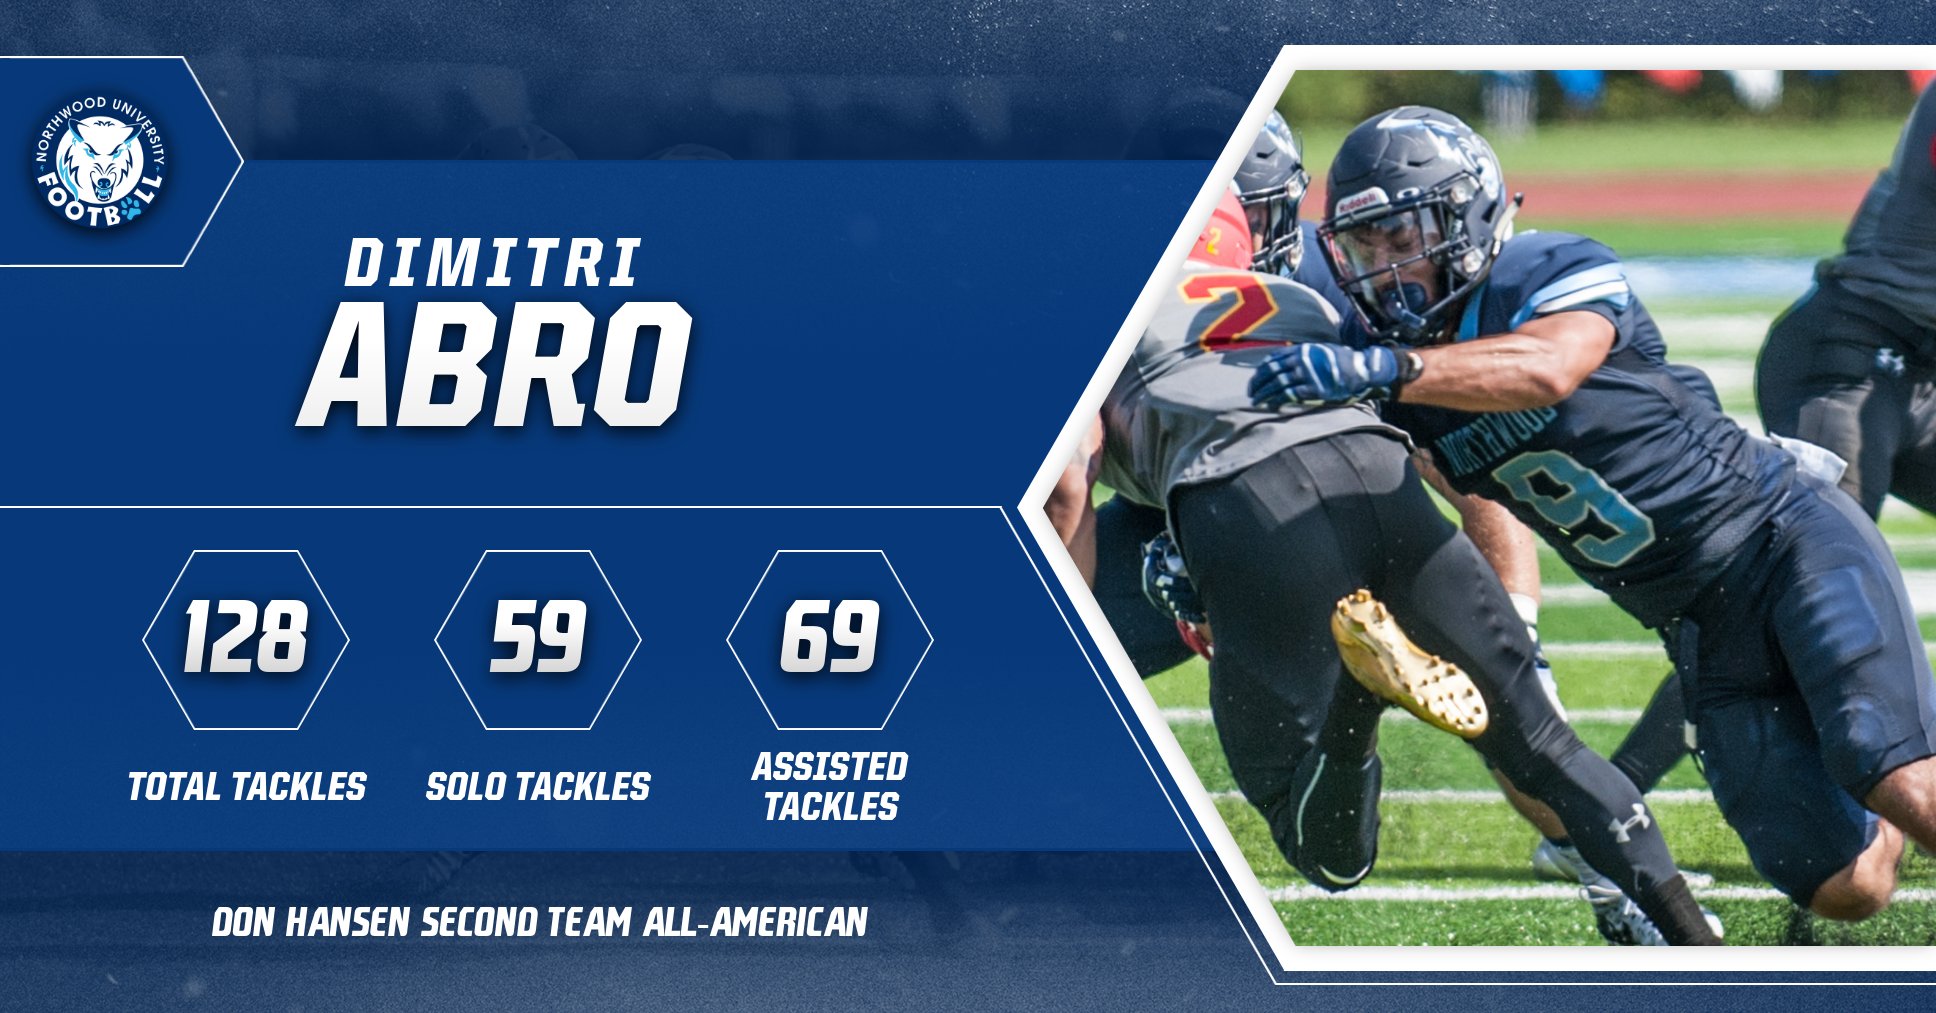 Dimitri Abro Named Second Team All-American By The Don Hansen Football Committee